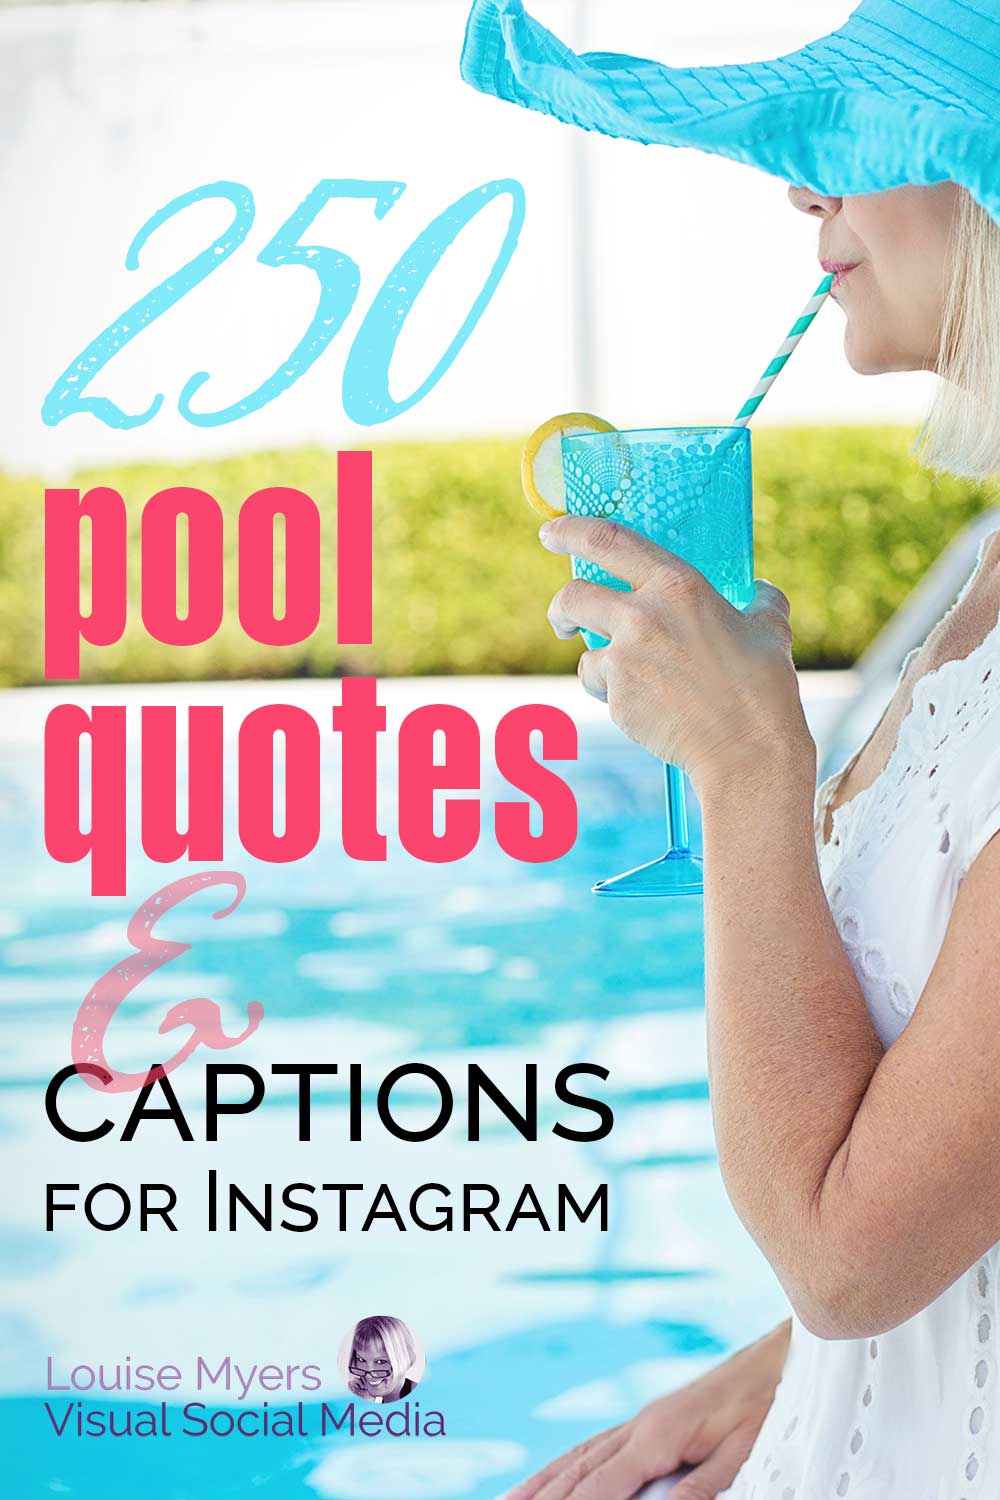 woman at pool with turquoise hat and drink says 250 Pool Quotes & Captions for Instagram.